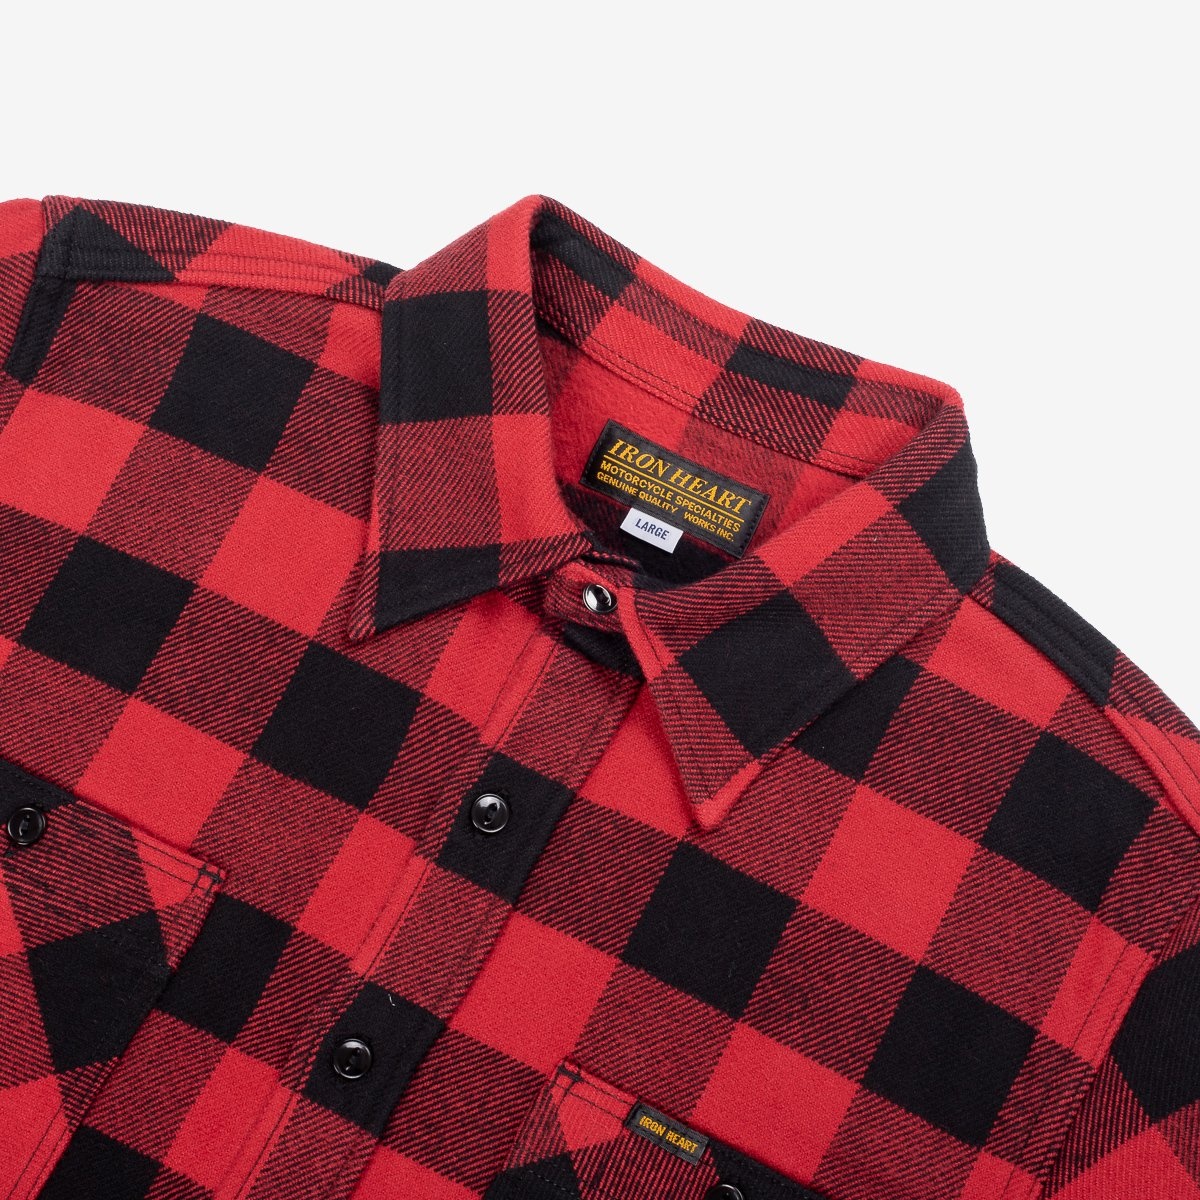 IHSH-244-RED Ultra Heavy Flannel Buffalo Check Work Shirt - Red/Black - 6